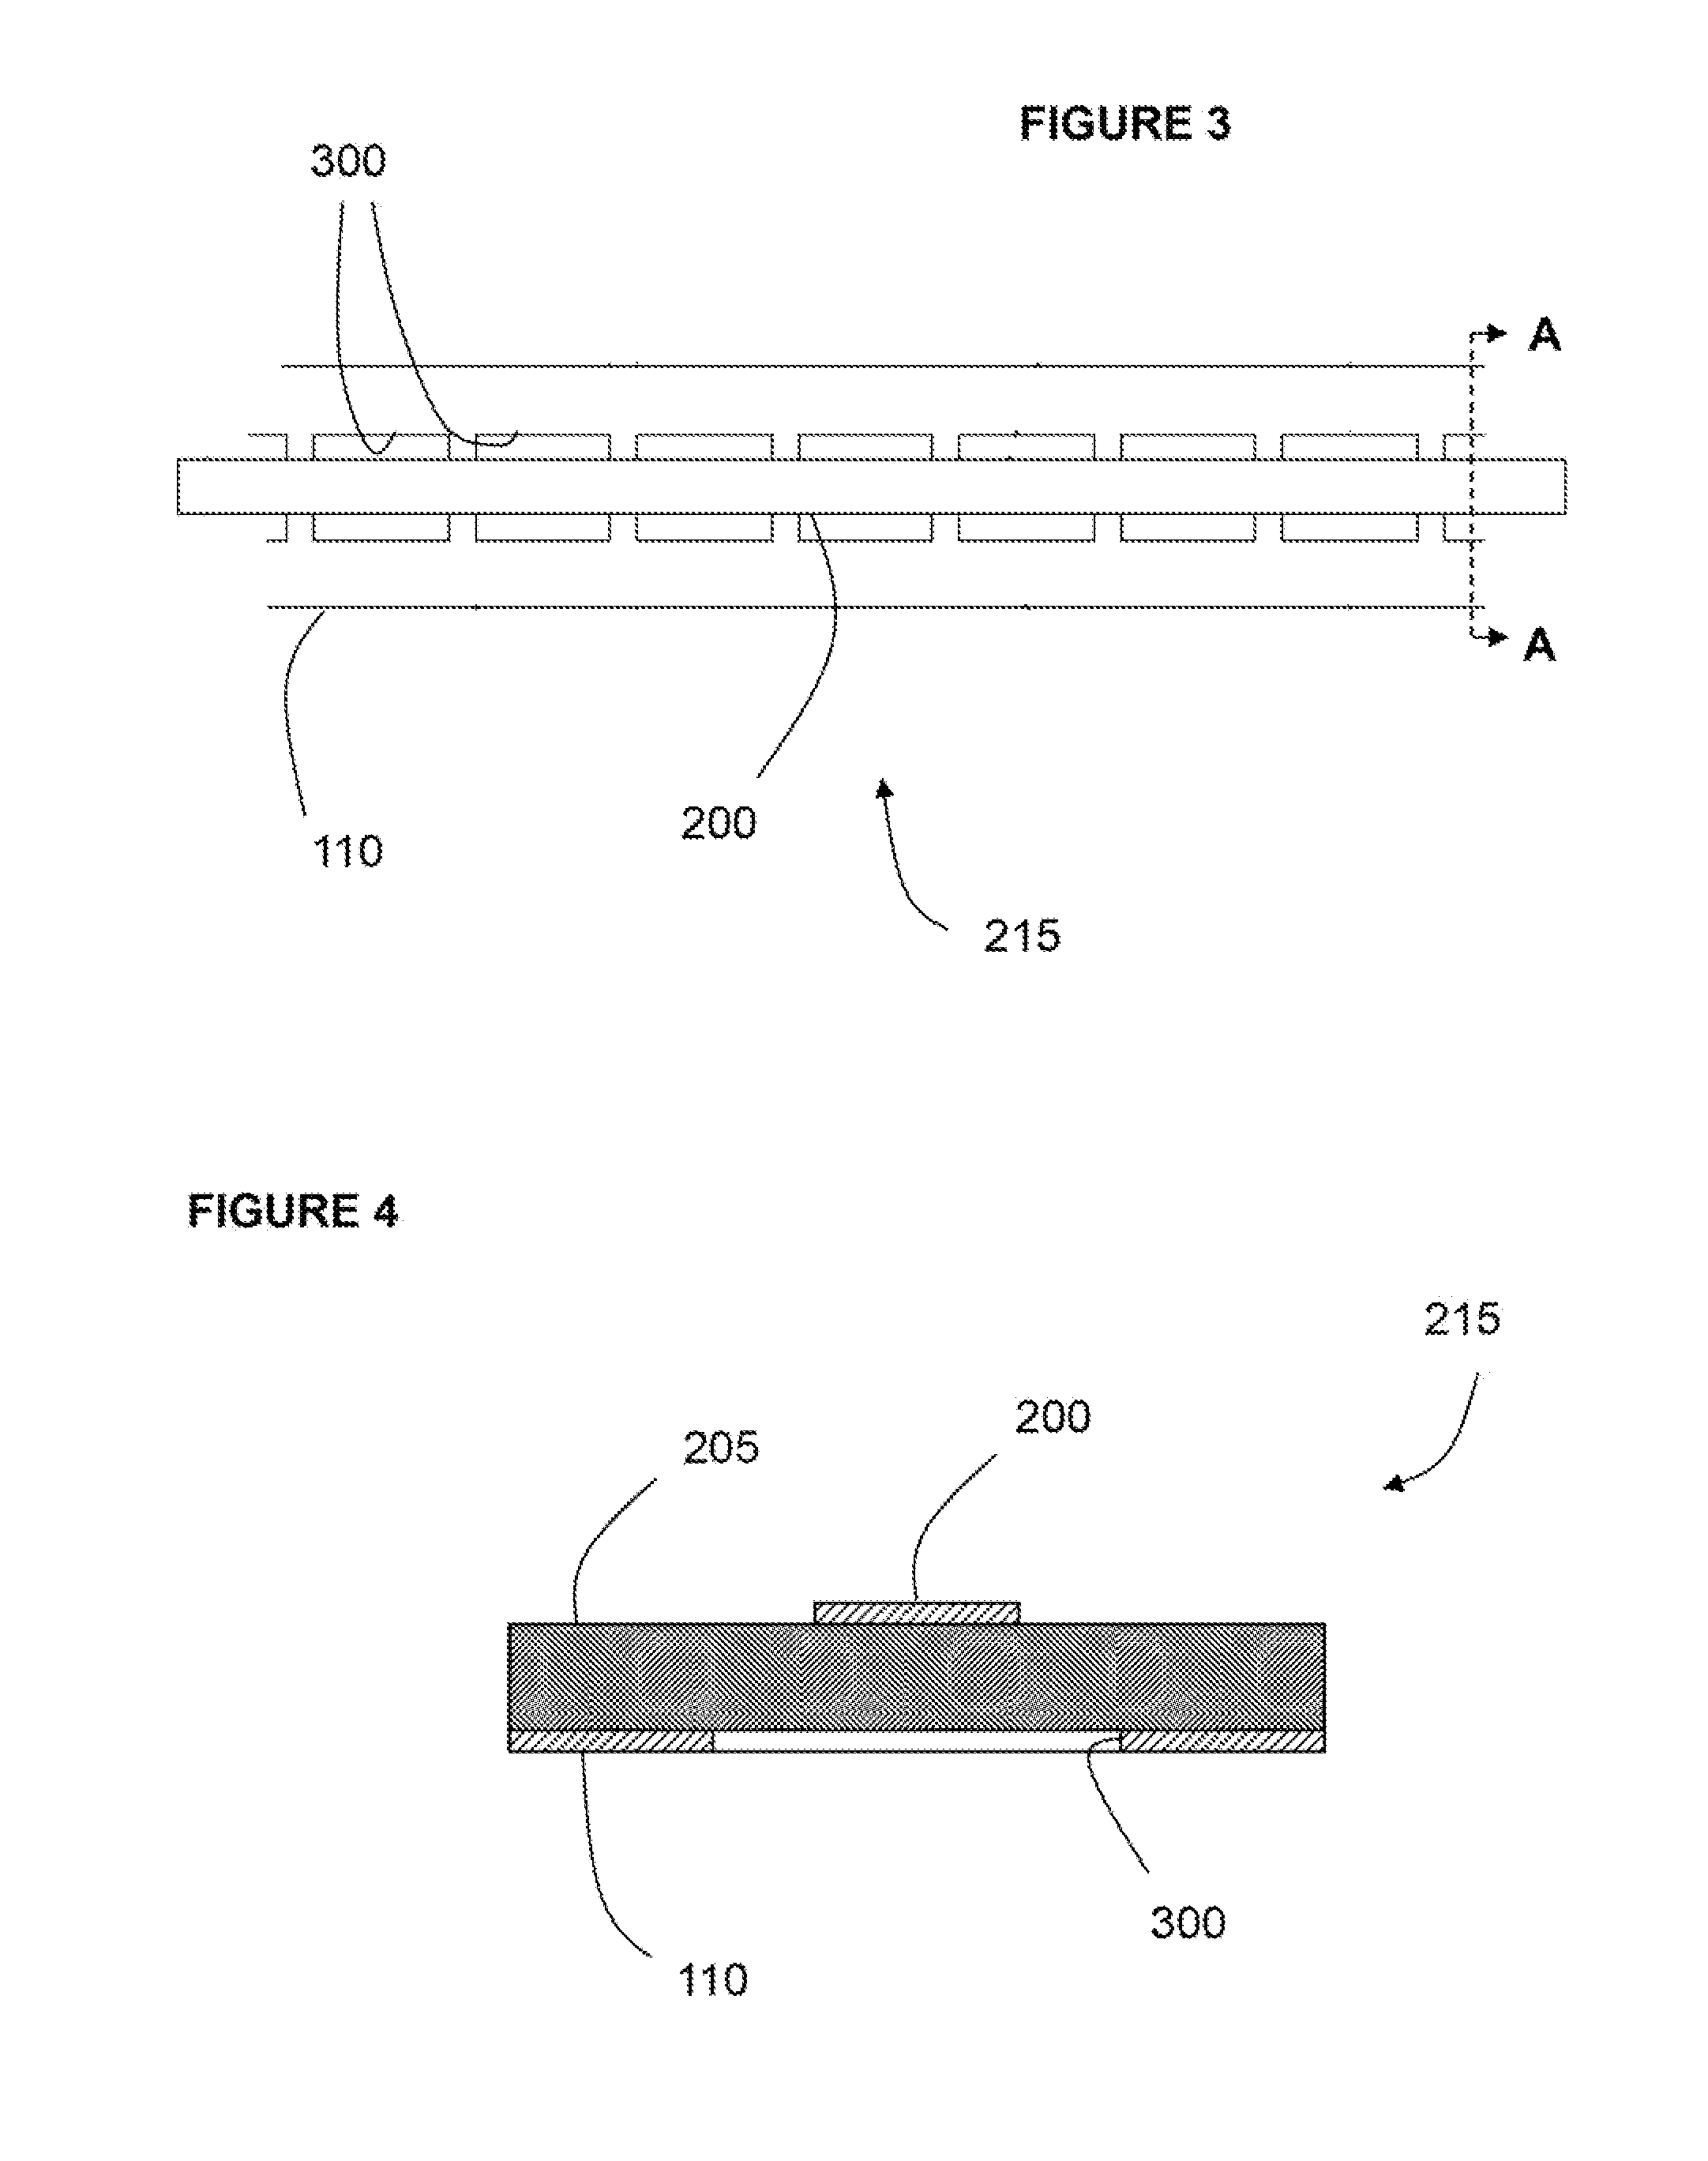 Wearable antenna having a microstrip feed line disposed on a flexible fabric and including periodic apertures in a ground plane